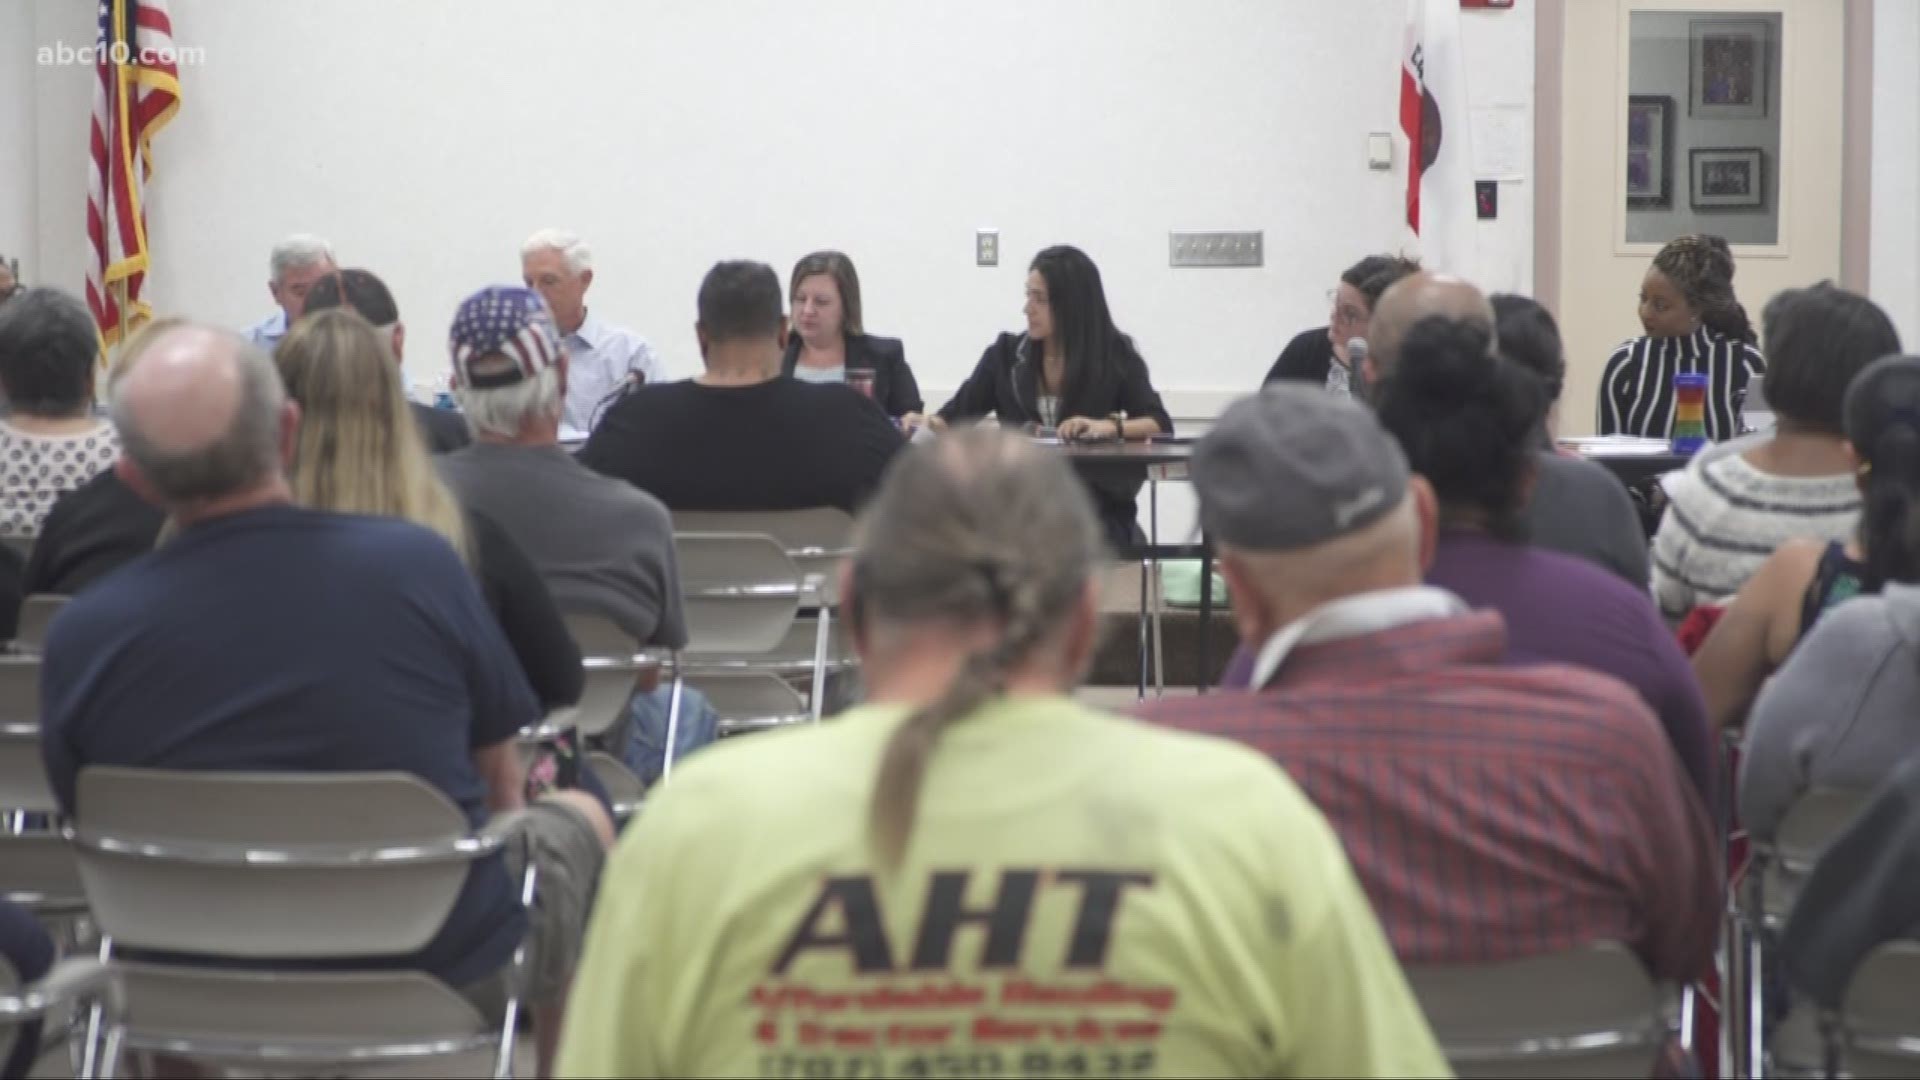 Many people are outright mad in Vacaville over plans for a tiny shelter community for homeless people going up in their neighborhood. Others argue that it won't become a "homeless camp" and it will offer services for those who are serious about getting of